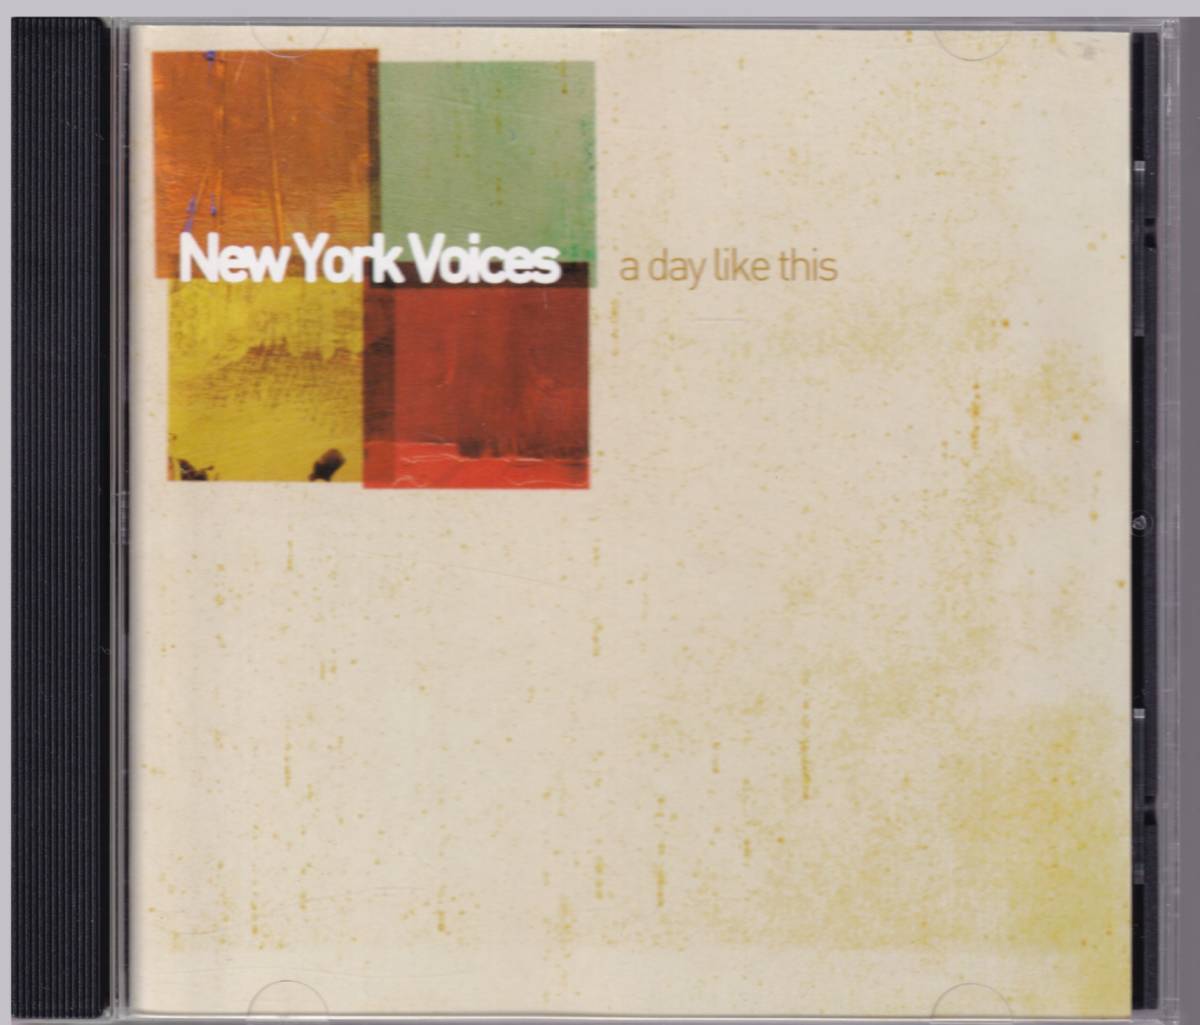 CD　「ア・デイ・ライク・ディス」ニュー・ヨーク・ヴォイセズ　（「A Day Like This」 NEW YORK VOICES）_画像1